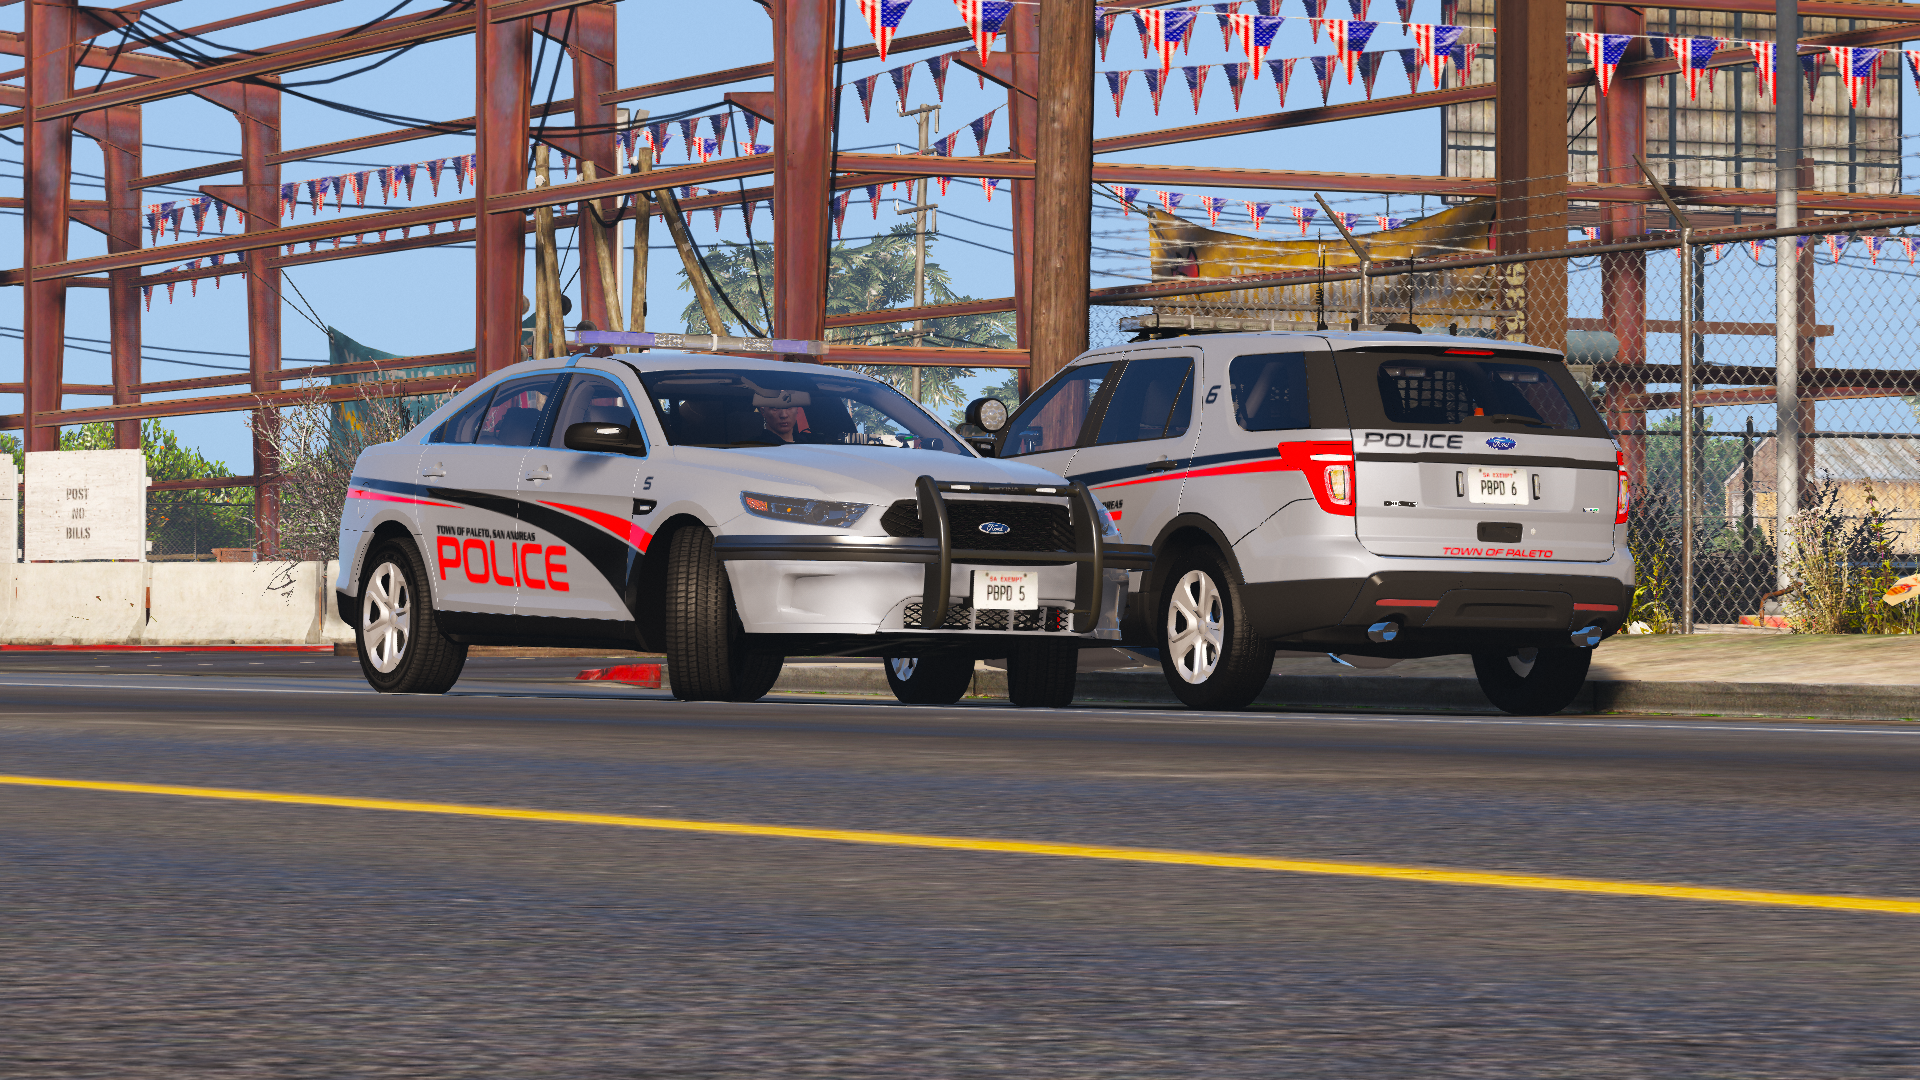 Grand_Theft_Auto_V_20_06_2020_15_19_24.png.ed2b4f68fbe0886ee81fc4d3e2fca351.png